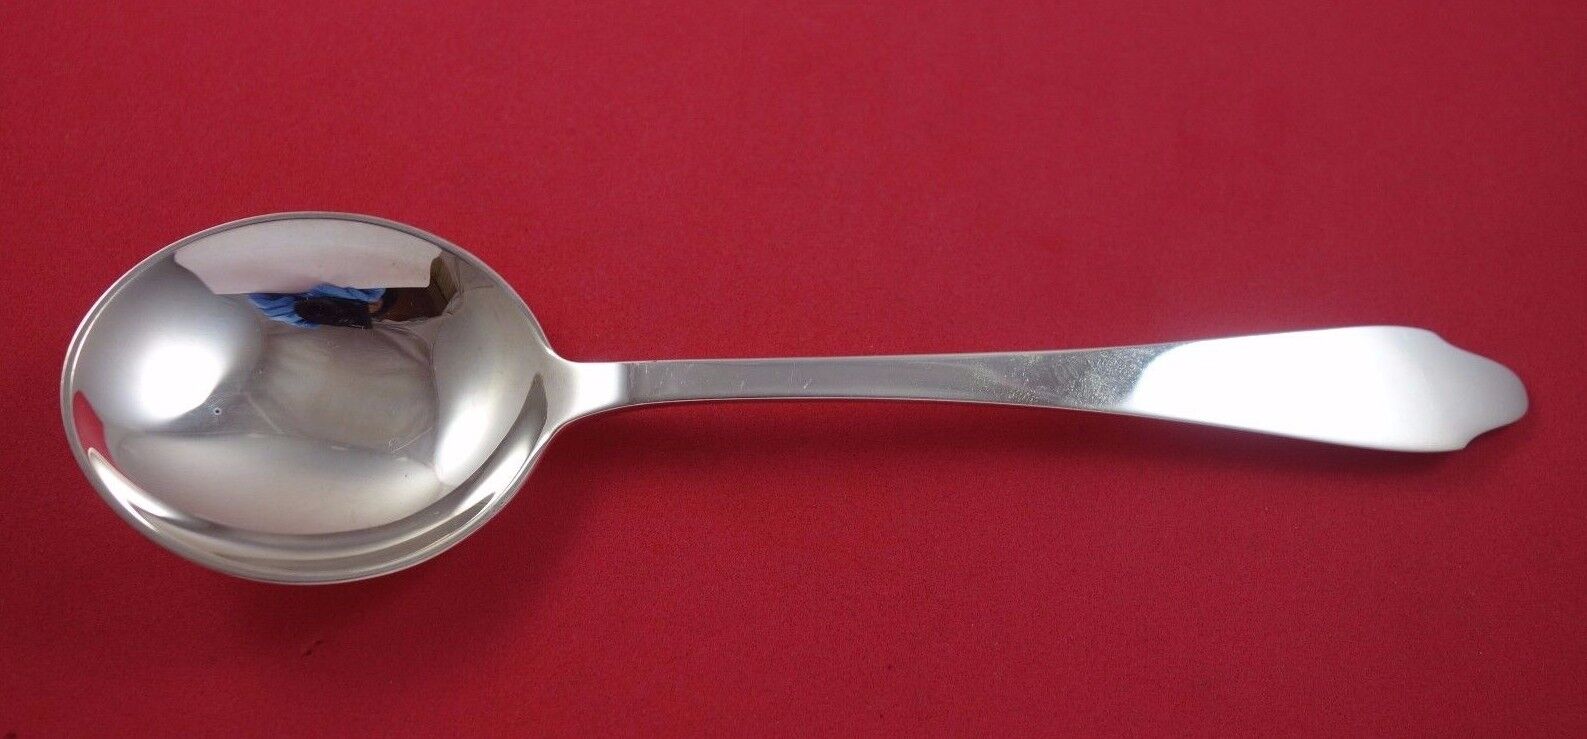 Clinton by Tiffany and Co Sterling Silver Gumbo Soup Spoon 7 3/8" Silverware